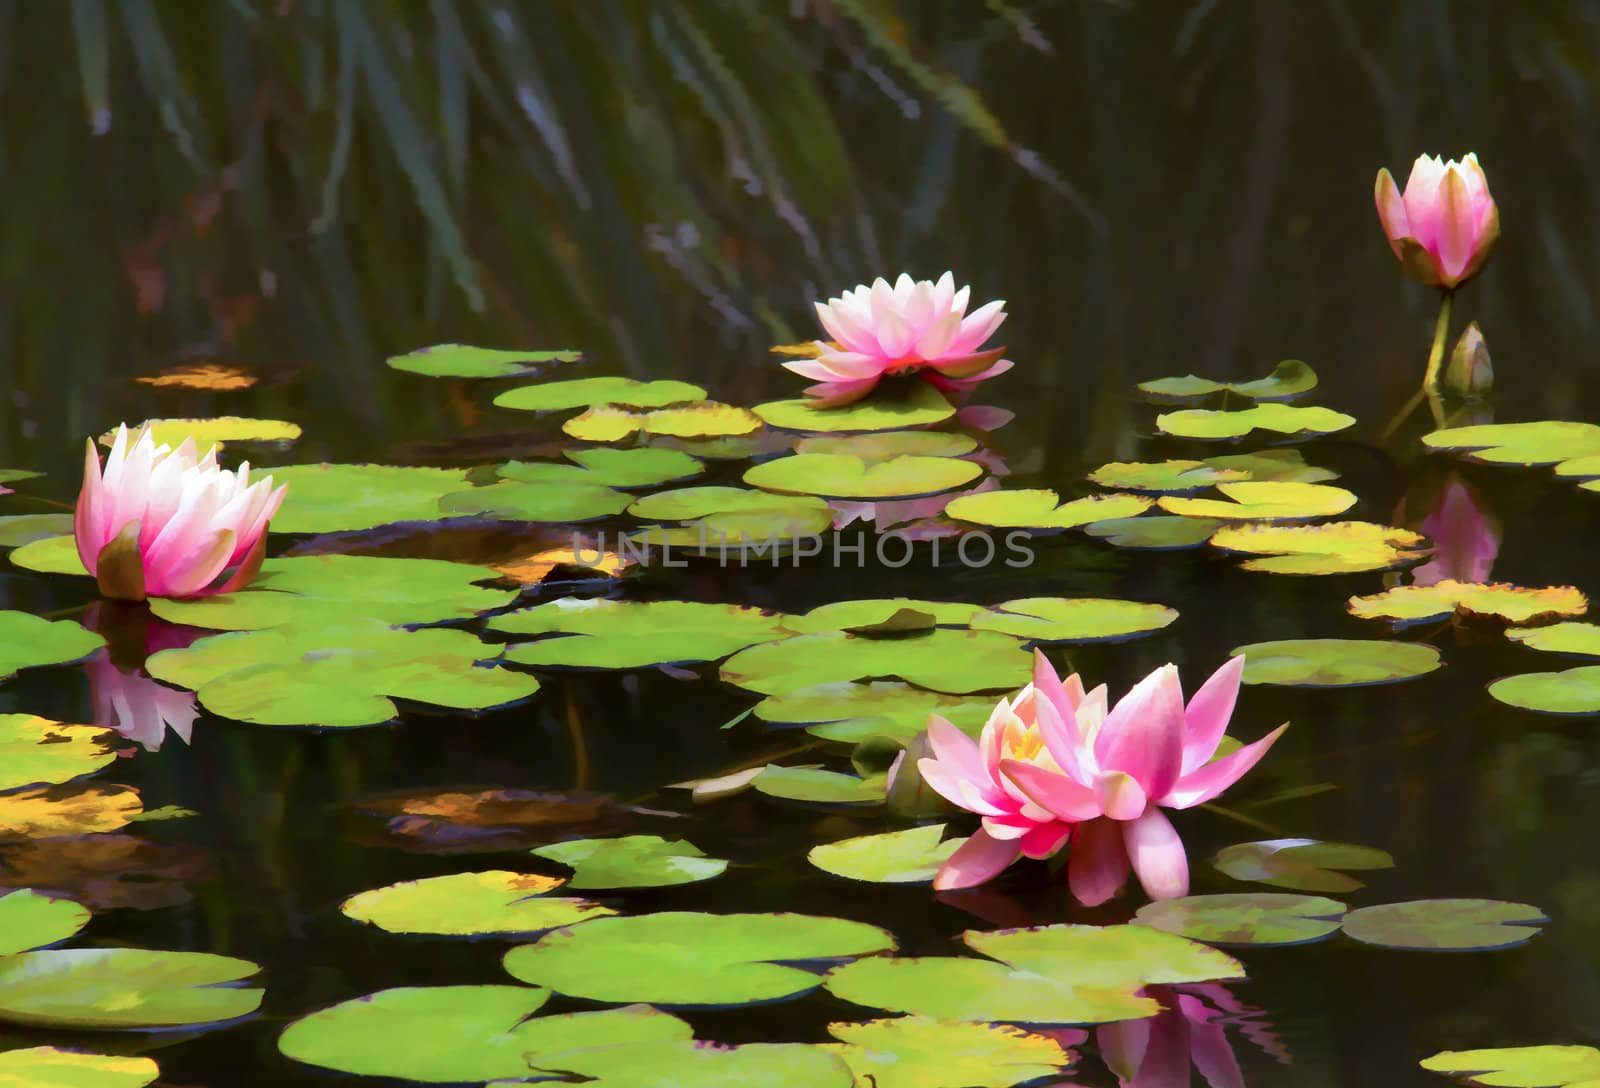 Lily pads on the pond with pastel flowers in bloom.